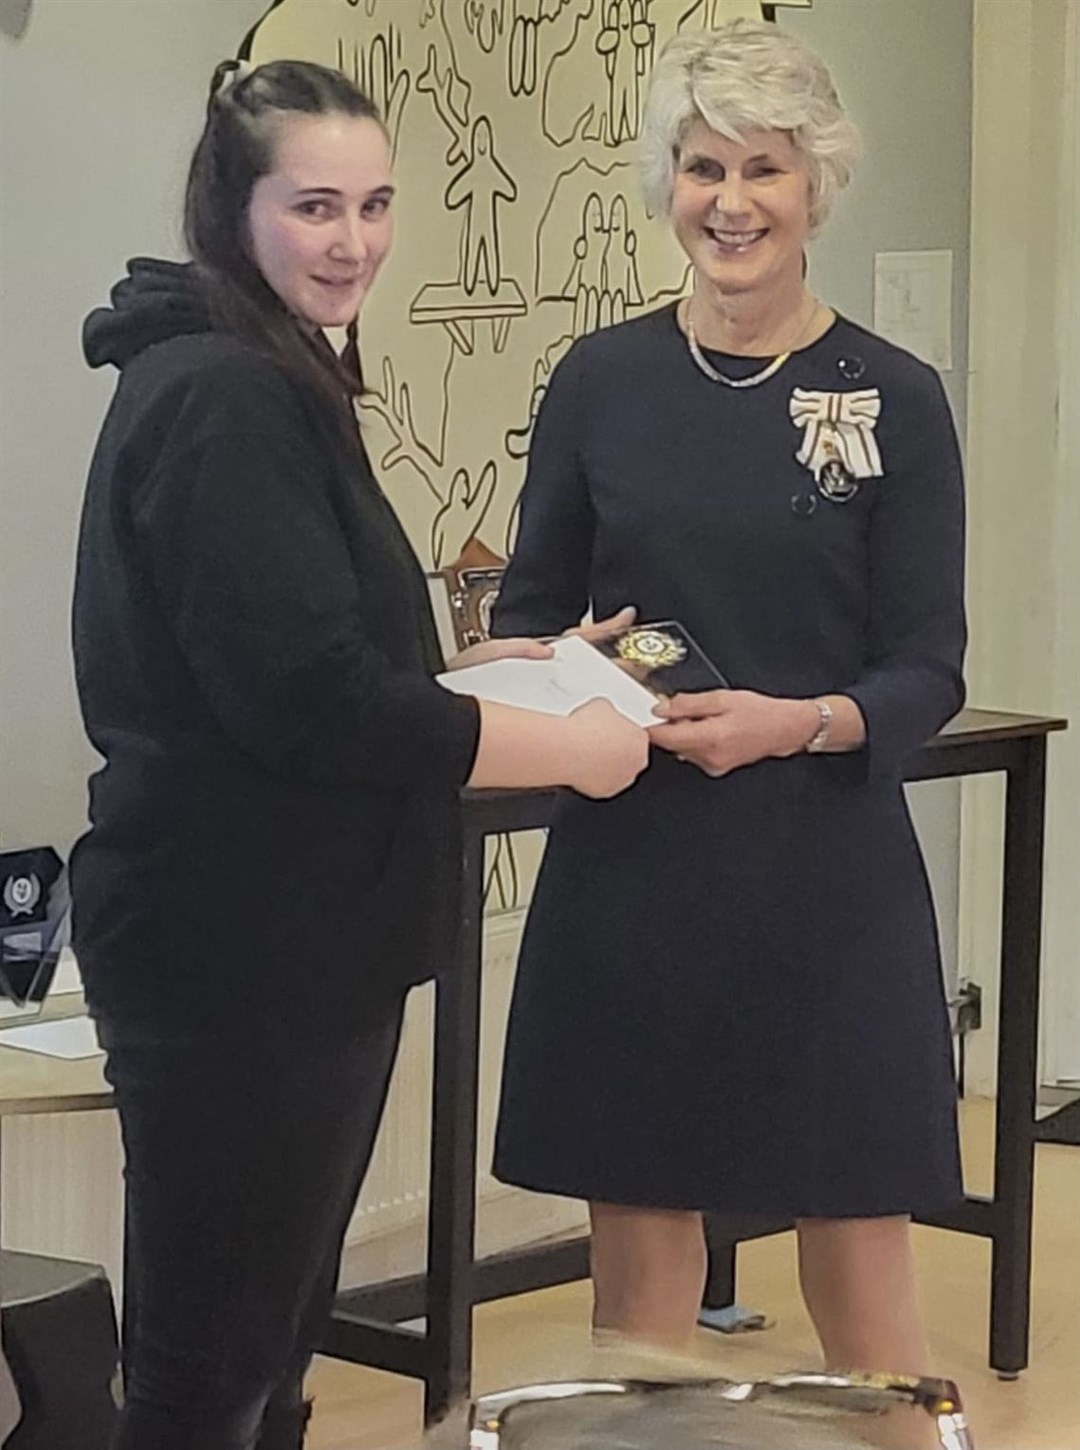 Alisha Urquhart, recipient of the Baba Watt Volunteer of the Year Award, and Joanie Whiteford, Lord Lieutenant of Ross & Cromarty.